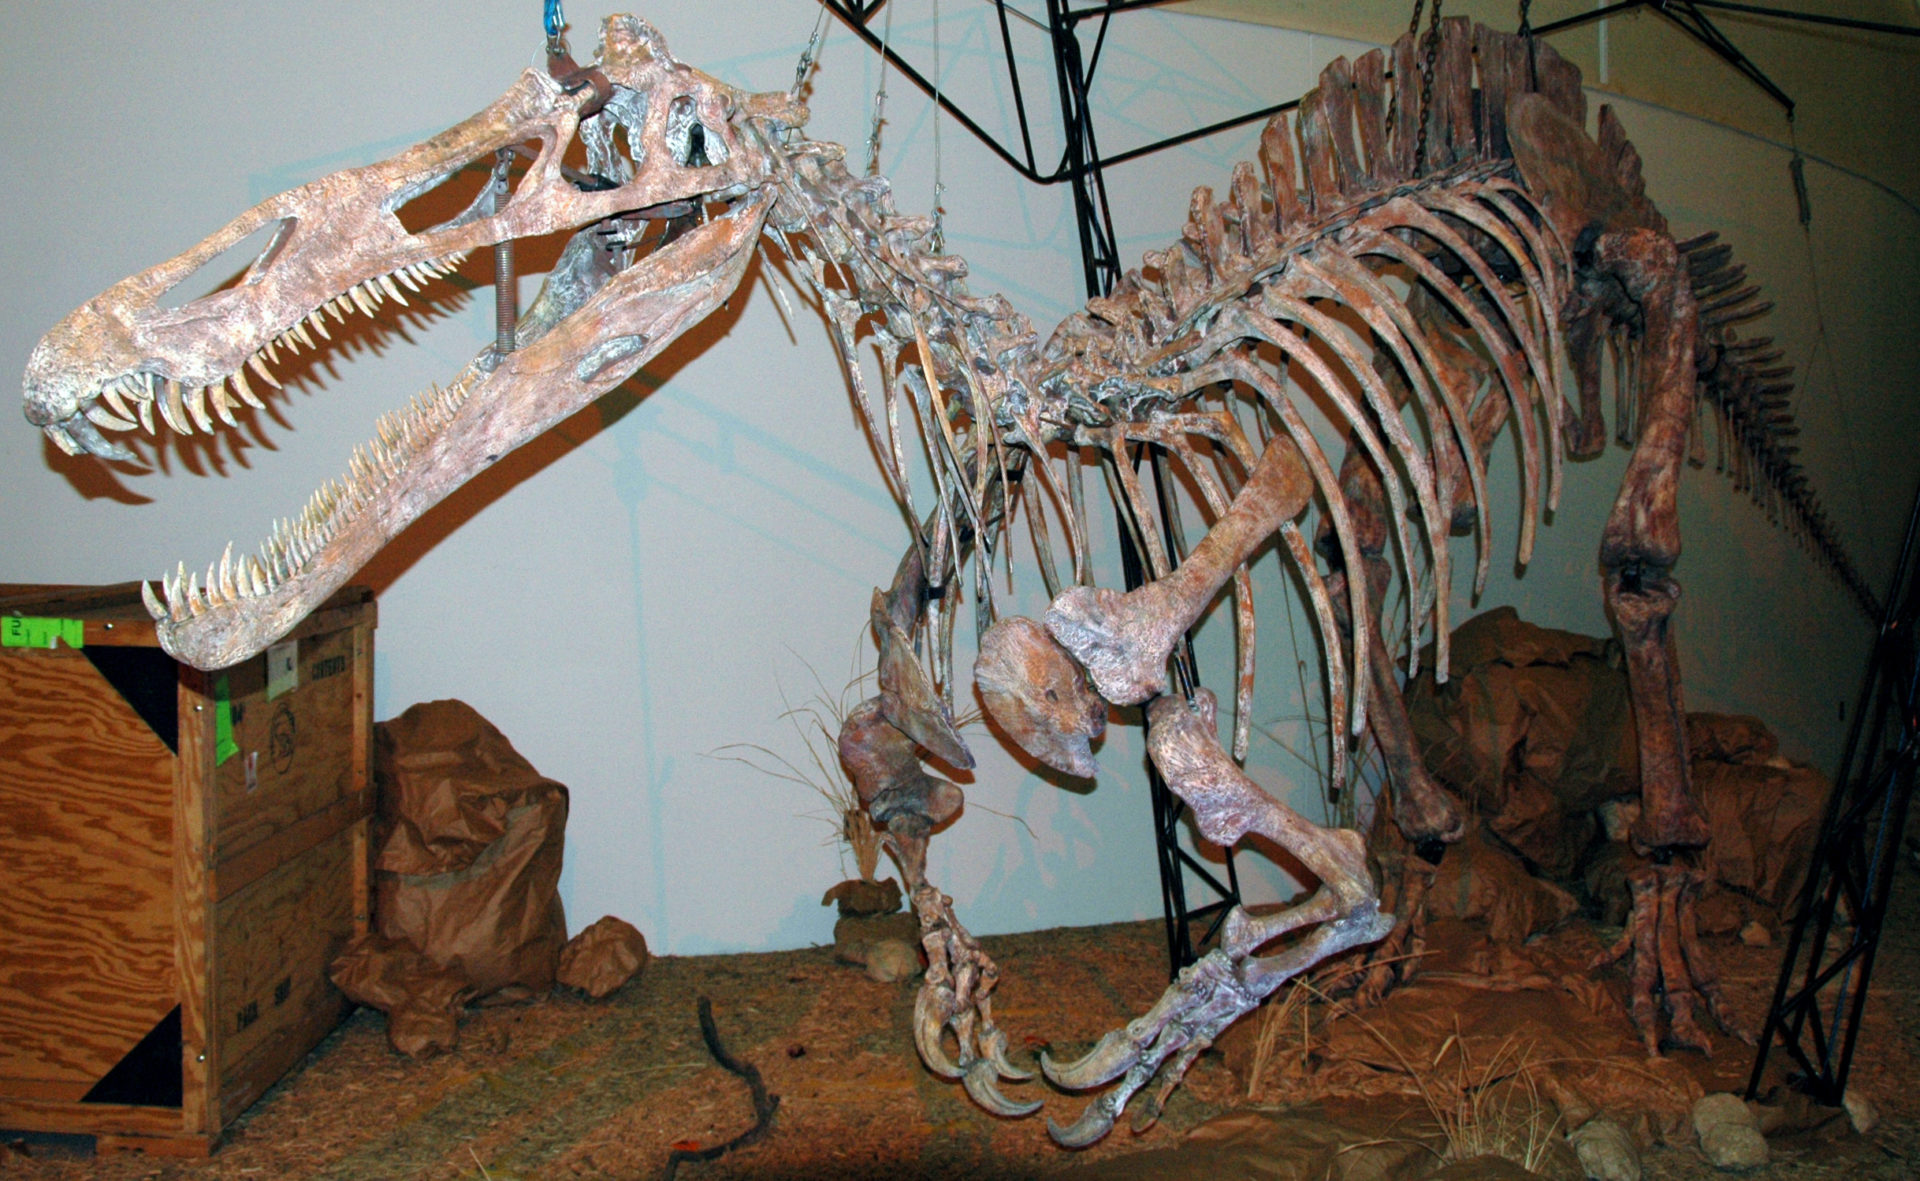 A relative of Spinosaurus, Suchomimus vs Carcharodontosaurus fights may have taken place